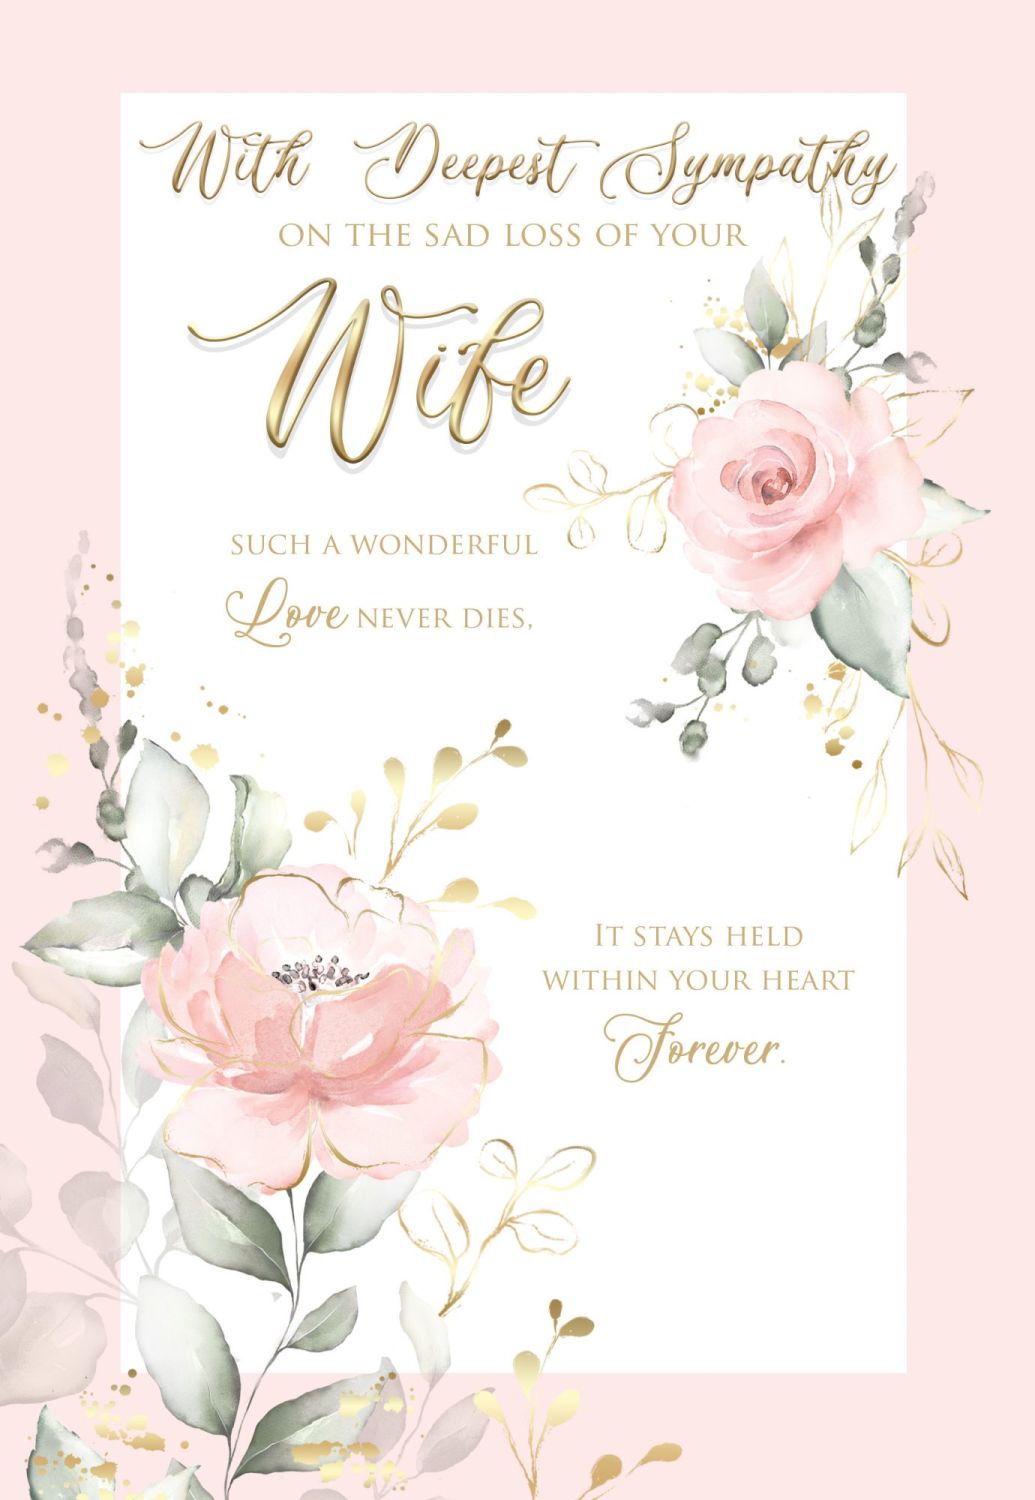 Wife Sympathy Cards With Deepest Sympathy On The Sad Loss Of Your Wife